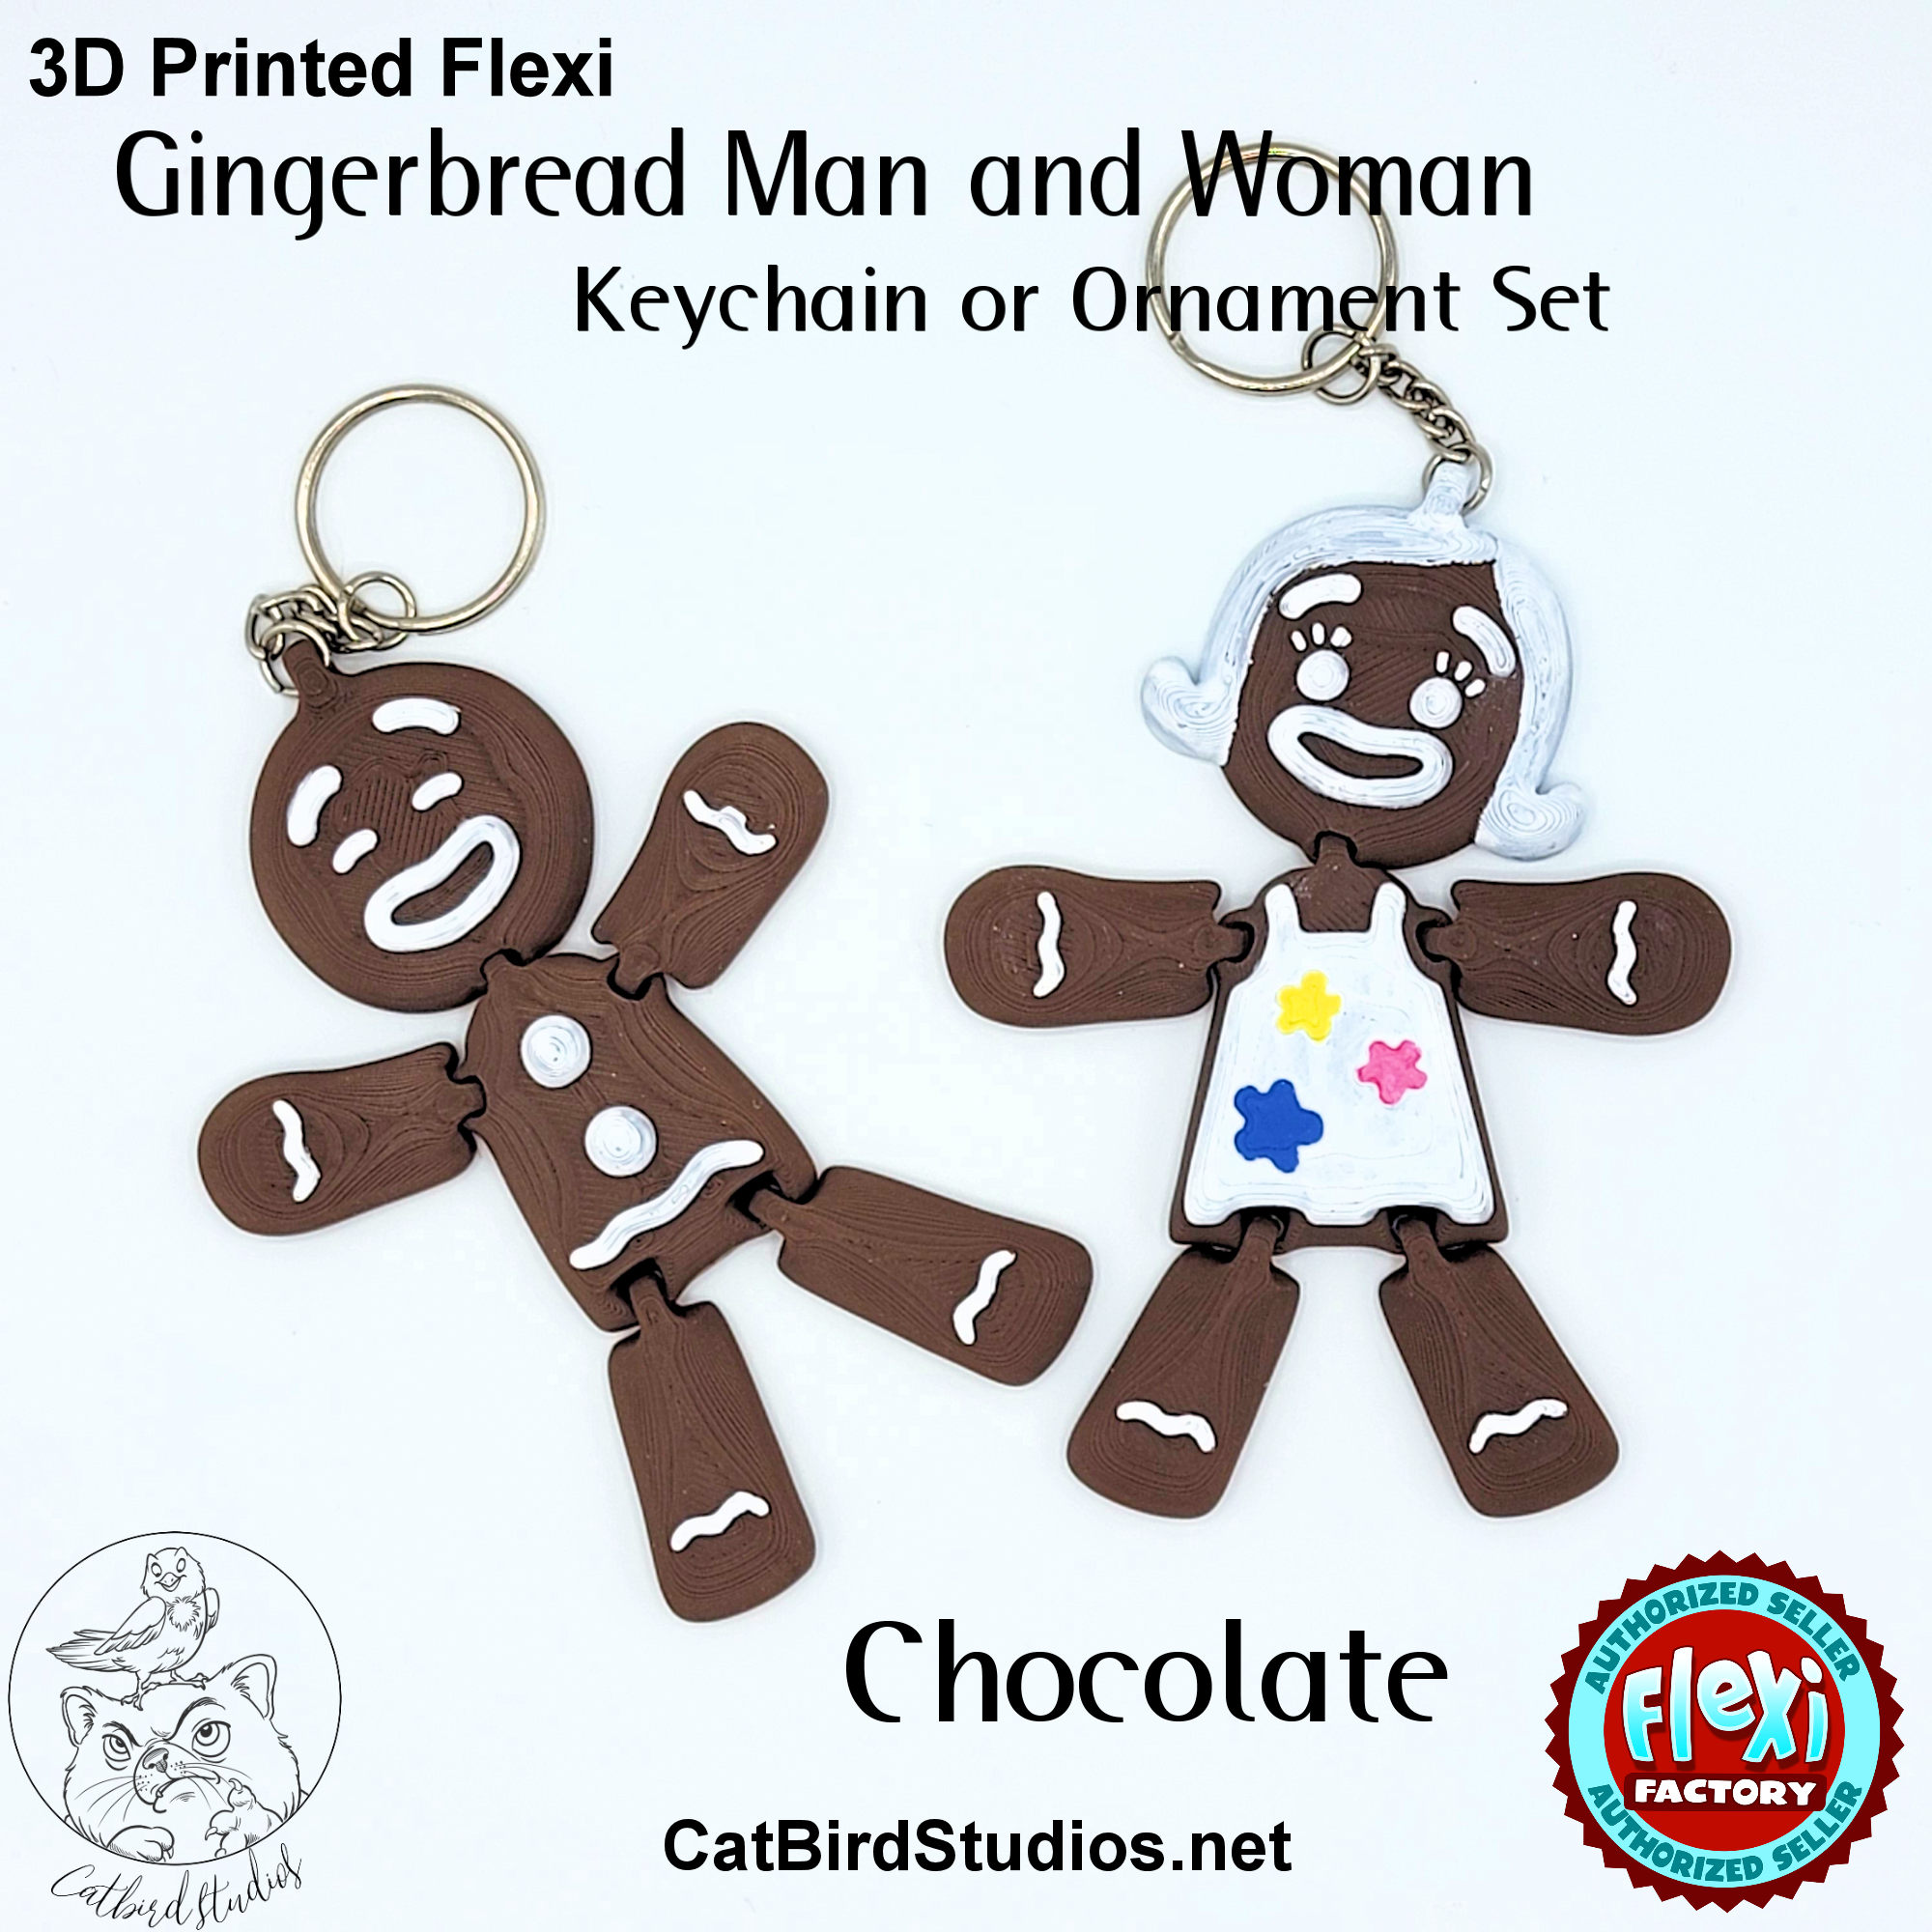 3D Printed Flexi Gingerbread Man and Woman Keychain or Ornament Set